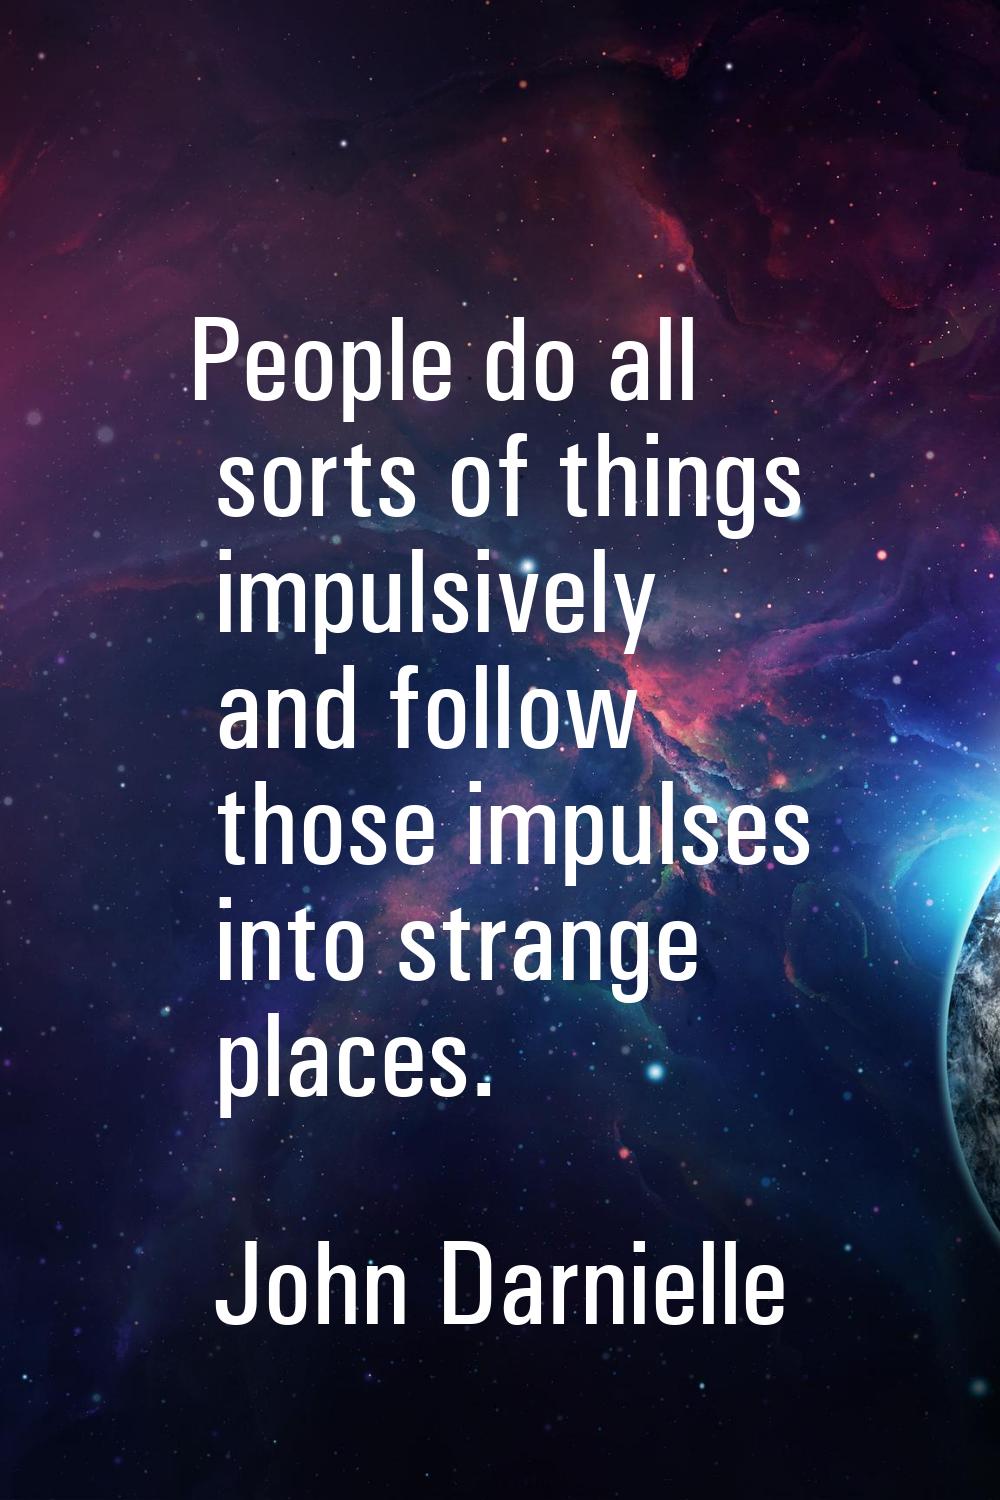 People do all sorts of things impulsively and follow those impulses into strange places.